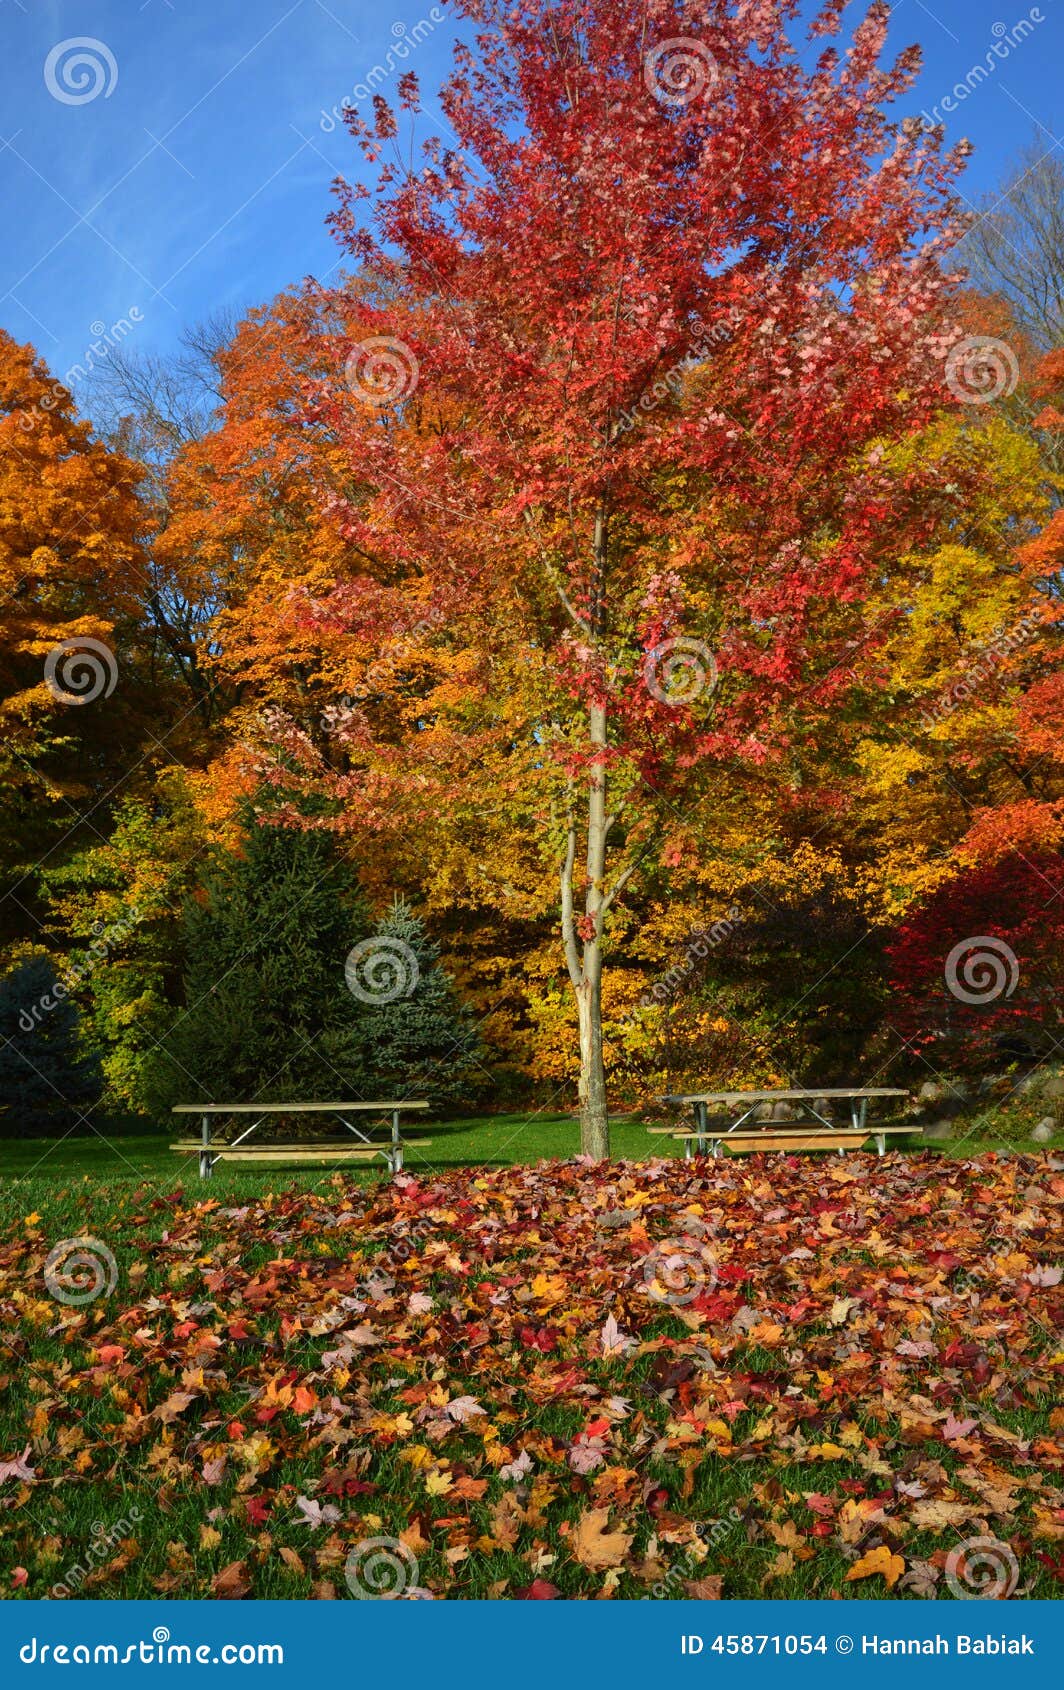 Picnic Tables, Fall Colors stock photo. Image of golden 